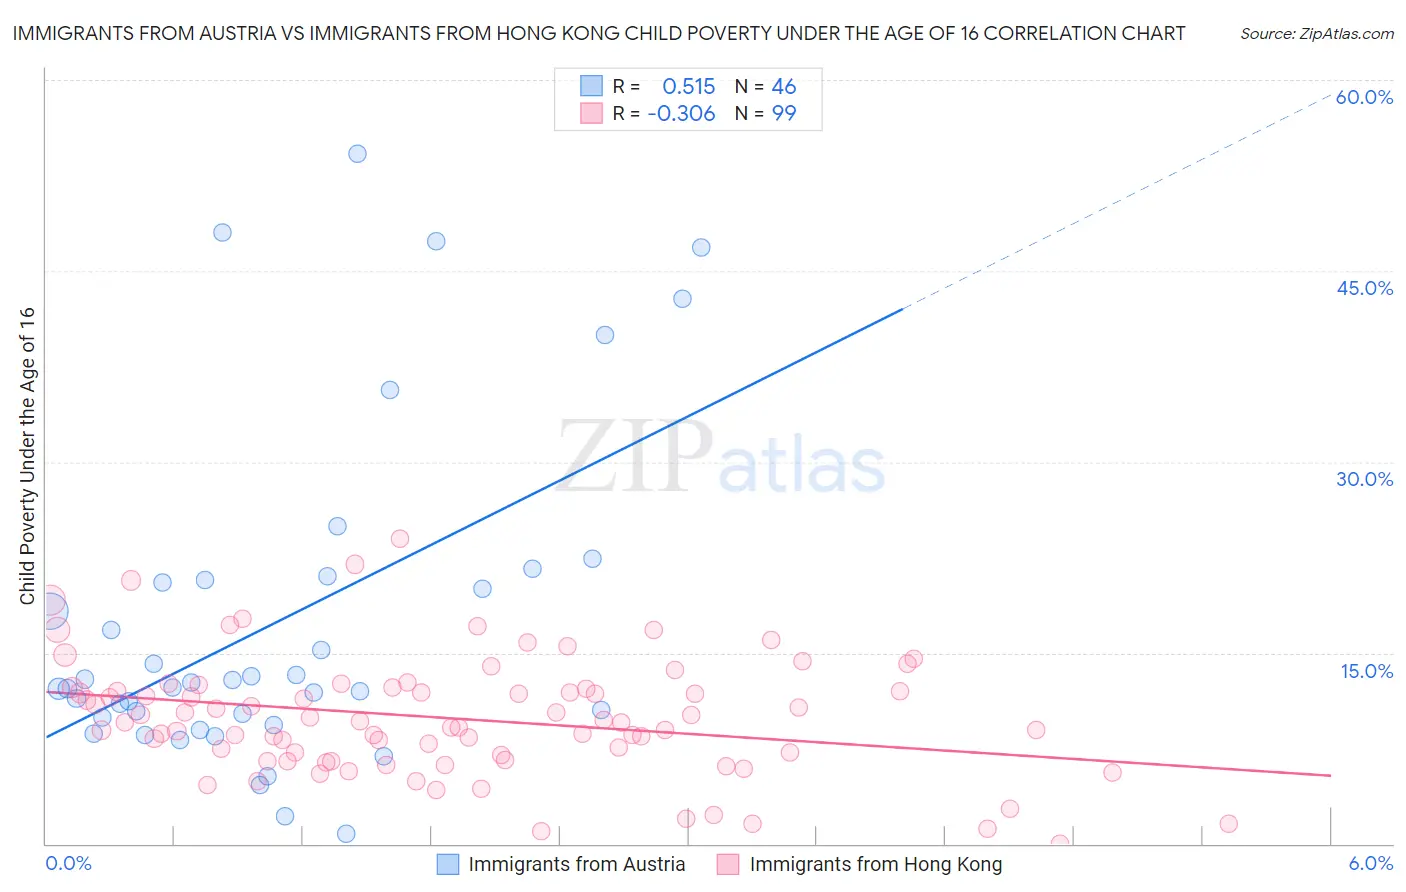 Immigrants from Austria vs Immigrants from Hong Kong Child Poverty Under the Age of 16